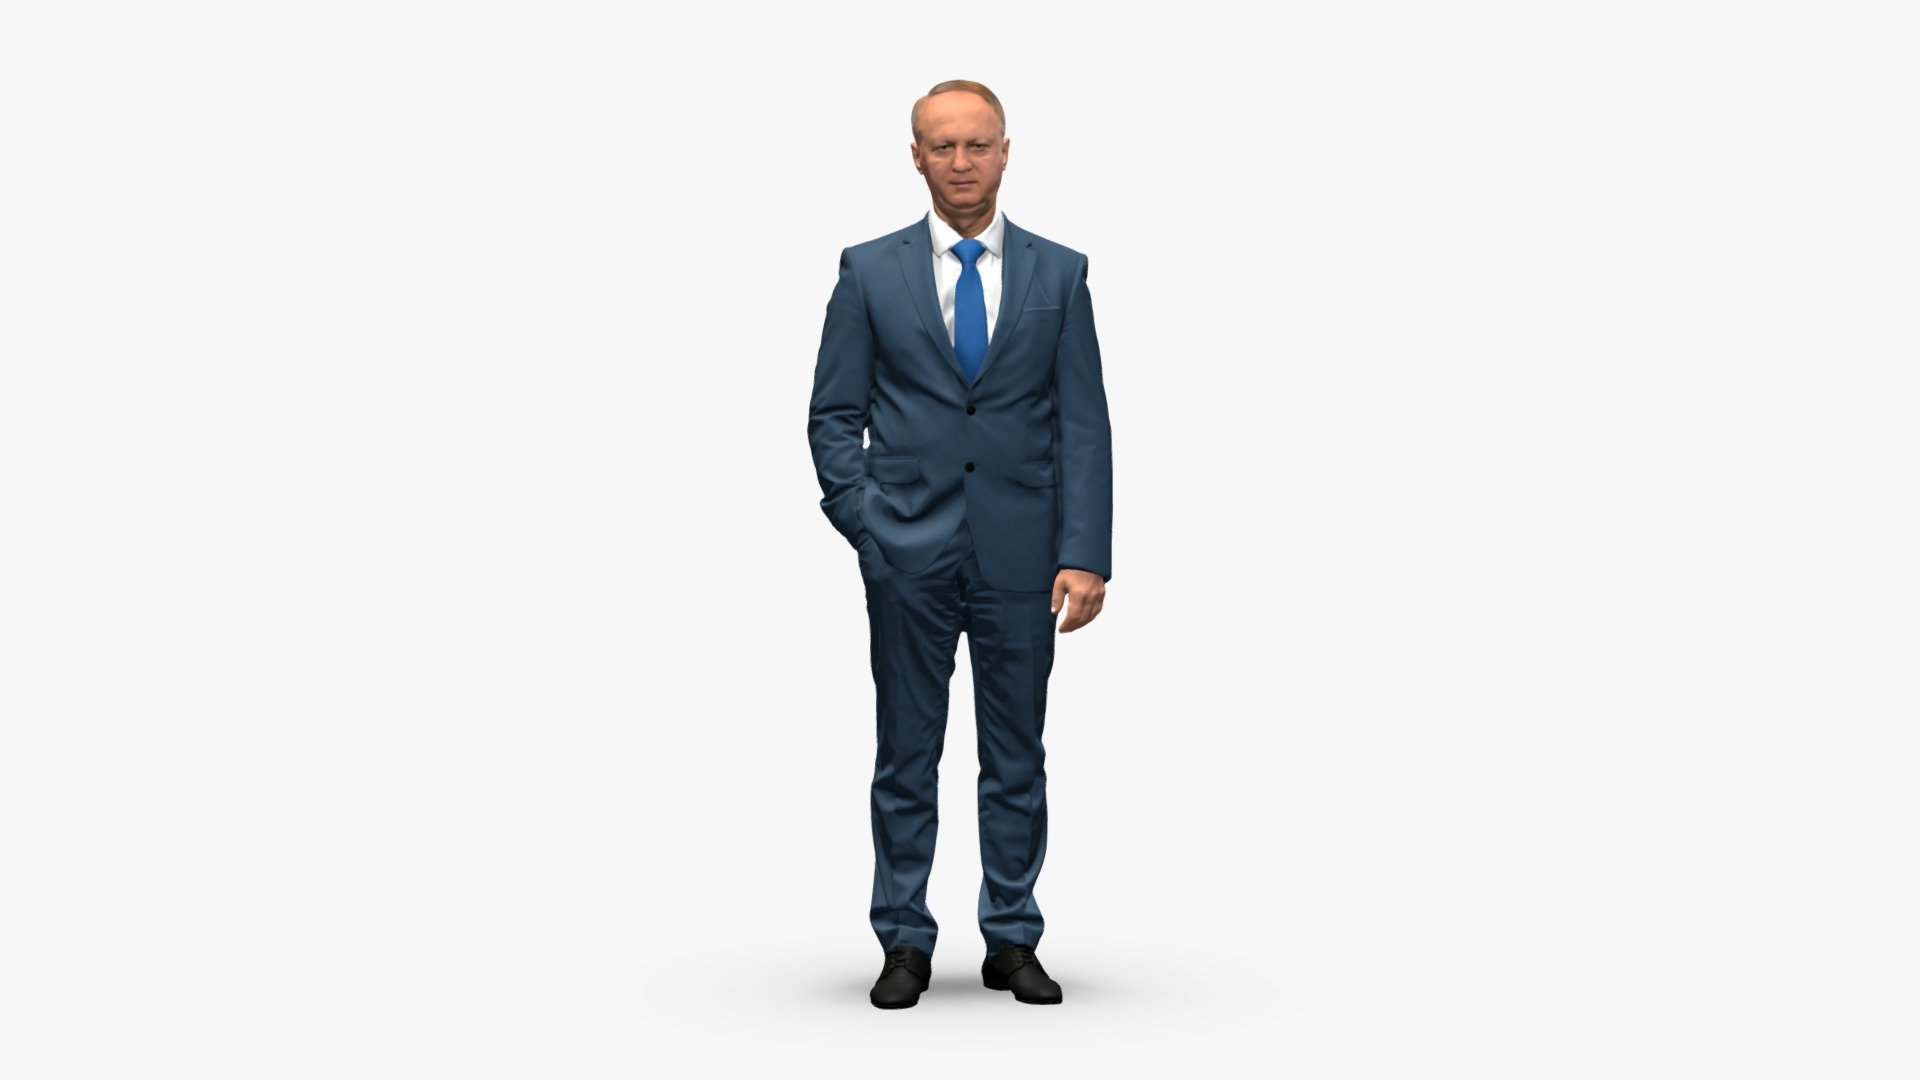 This 3D model depicts a man in a gray business suit with a white shirt, blue tie, and black shoes. The man has his right hand in the pocket of his suit and looks straight at the viewer, exuding confidence and determination in his serious gaze.

Main features:

high-end realistic 3d scanned model;
realistic proportions;
highest quality;
low price;

The scan is in height in real-world units.

FEATURES

3d scanned model
Extremely clean
professional quality UV map
high level of detail
high resolution textures
real-world scale - 001514_Man in Gray Suit - Buy Royalty Free 3D model by 3DFarm 3d model